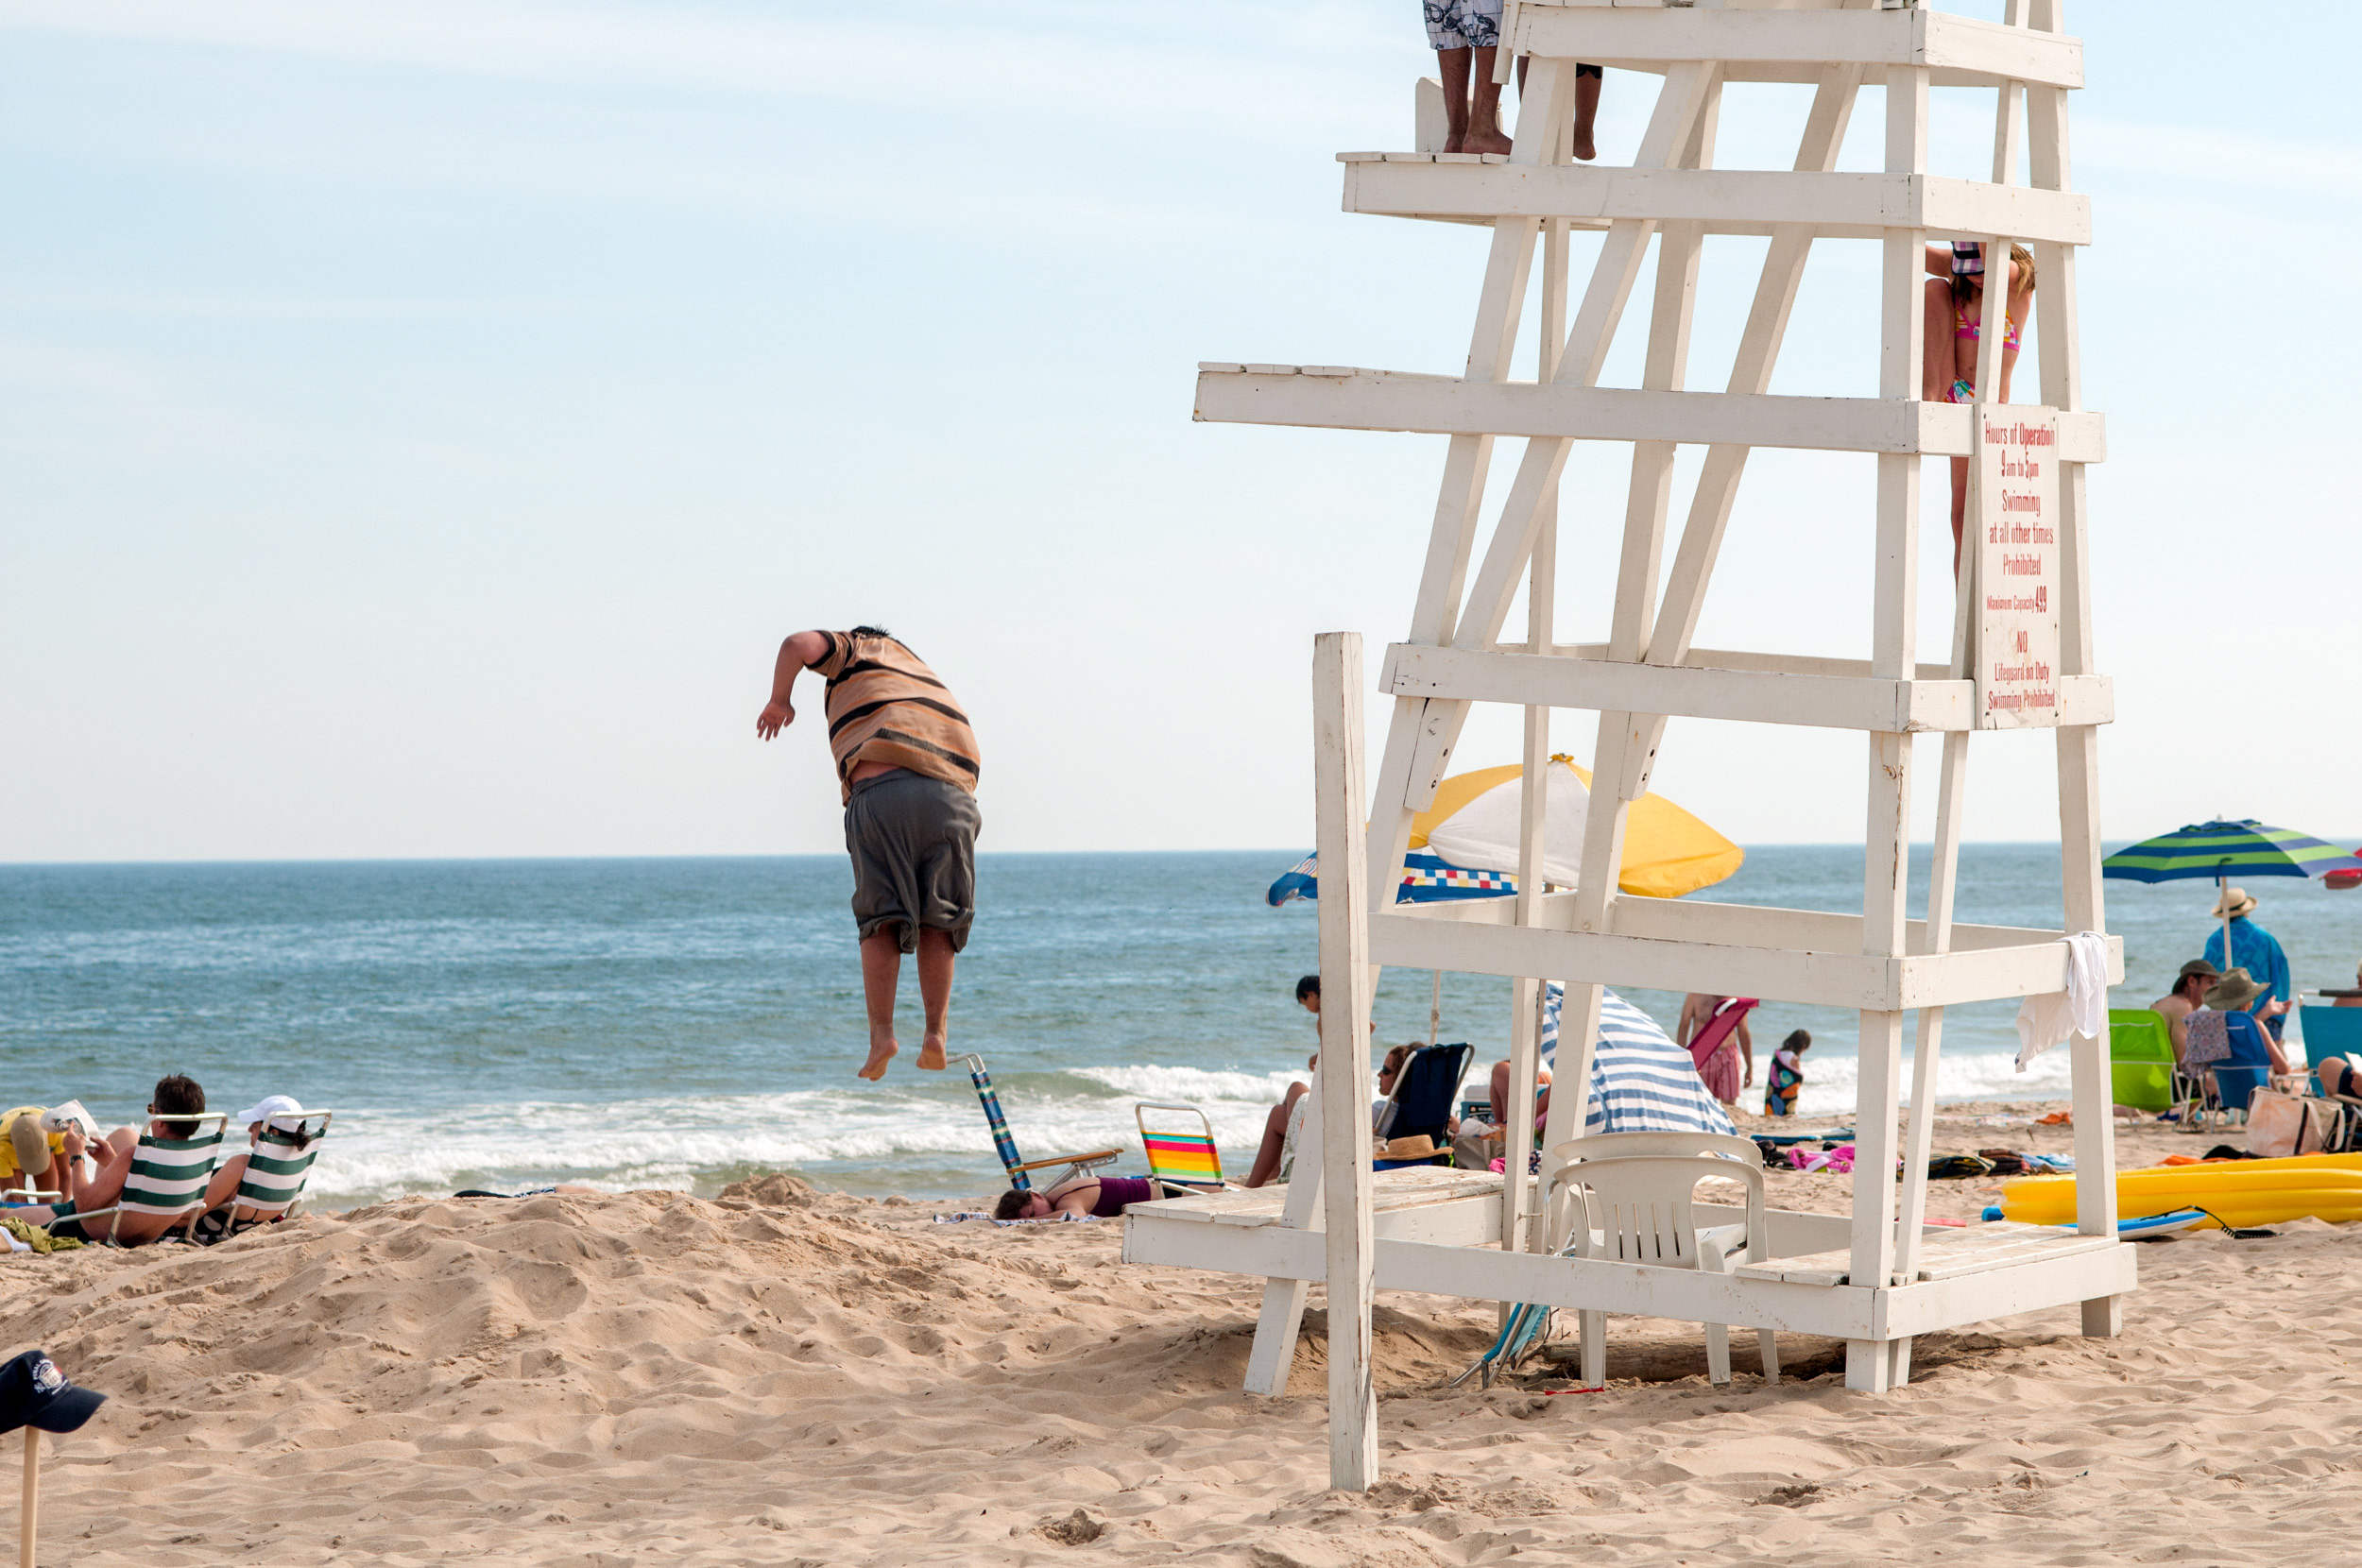 A-CHILD-HANGS-MID-AIR-AFTER-JUMPING-FROM-A-LIFEGUARD-CHAIR-IN-FIREISLAND-USA